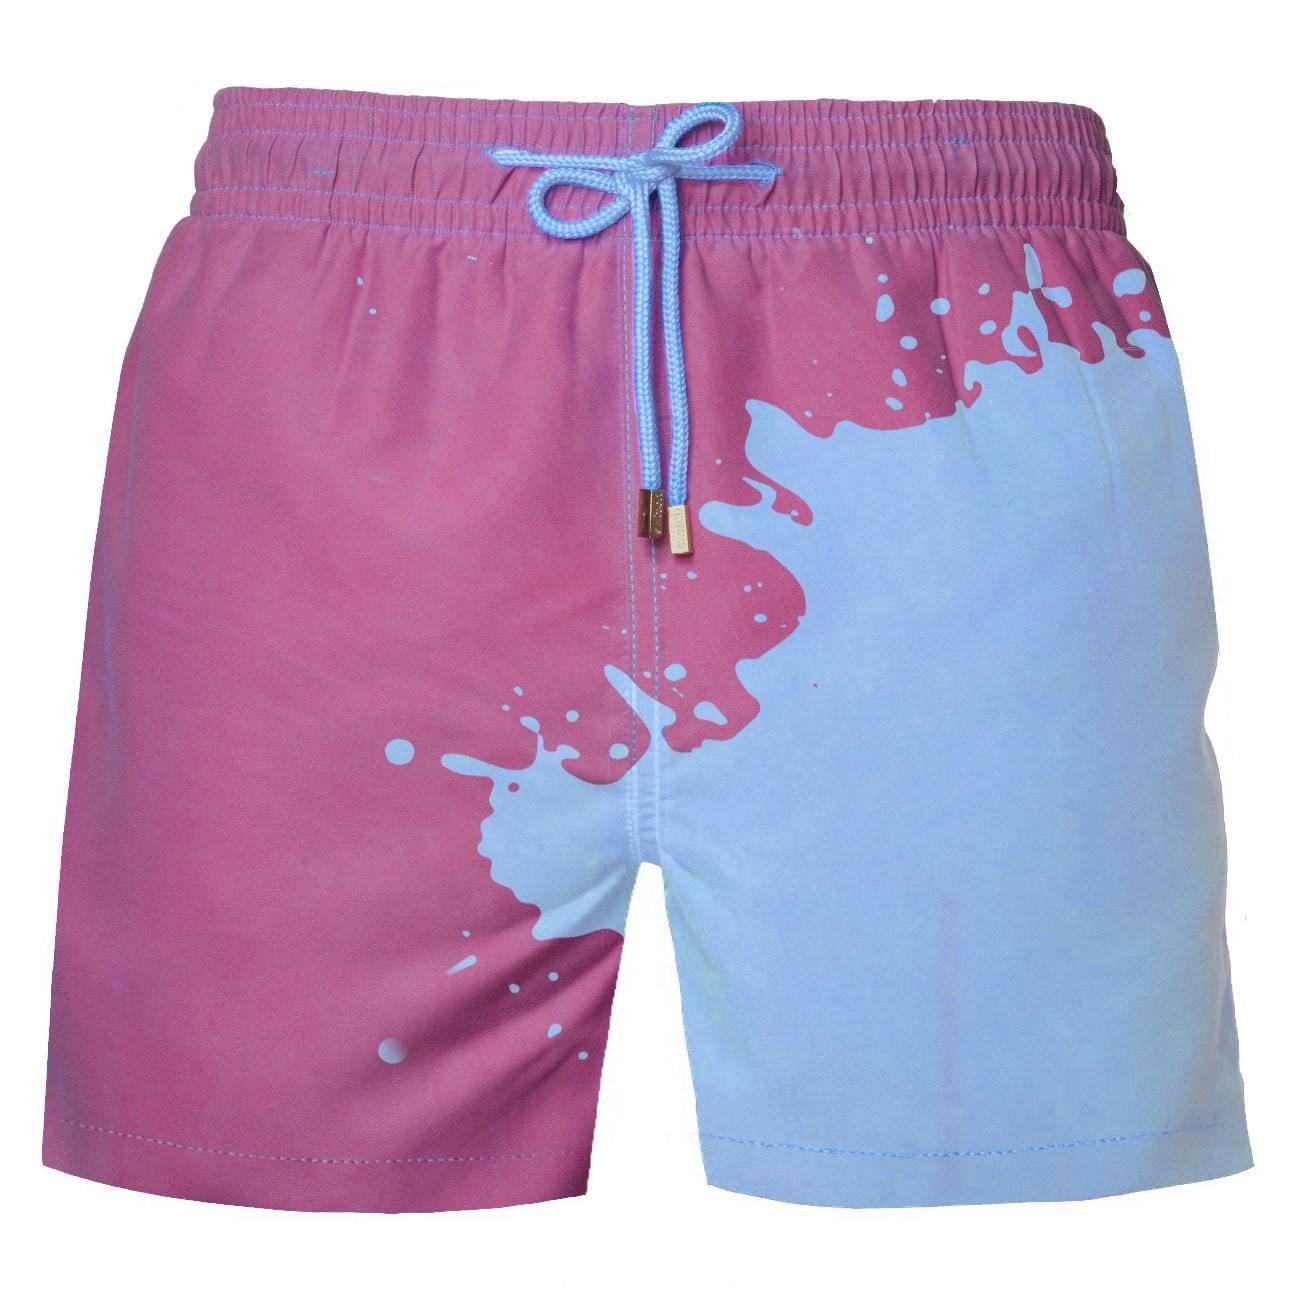 US$ 35.15 - HYPER SWITCHS COLOR CHANGING SWIM TRUNKS - www.sheinv.com